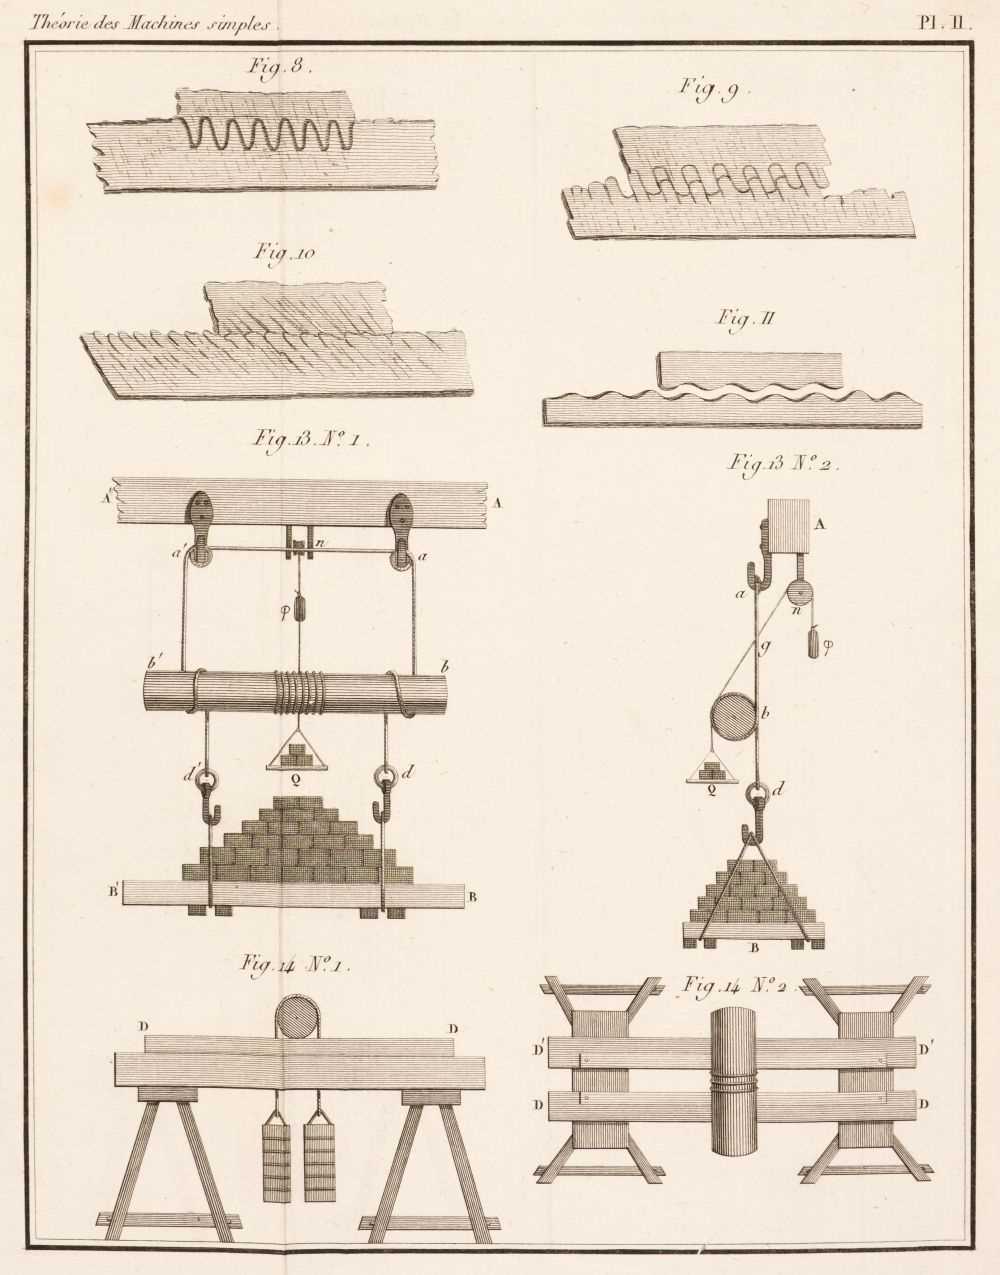 Lot 312 - Coulomb (Charles Augustin). Theorie des Machines Simples, nouvelle edition, 1821